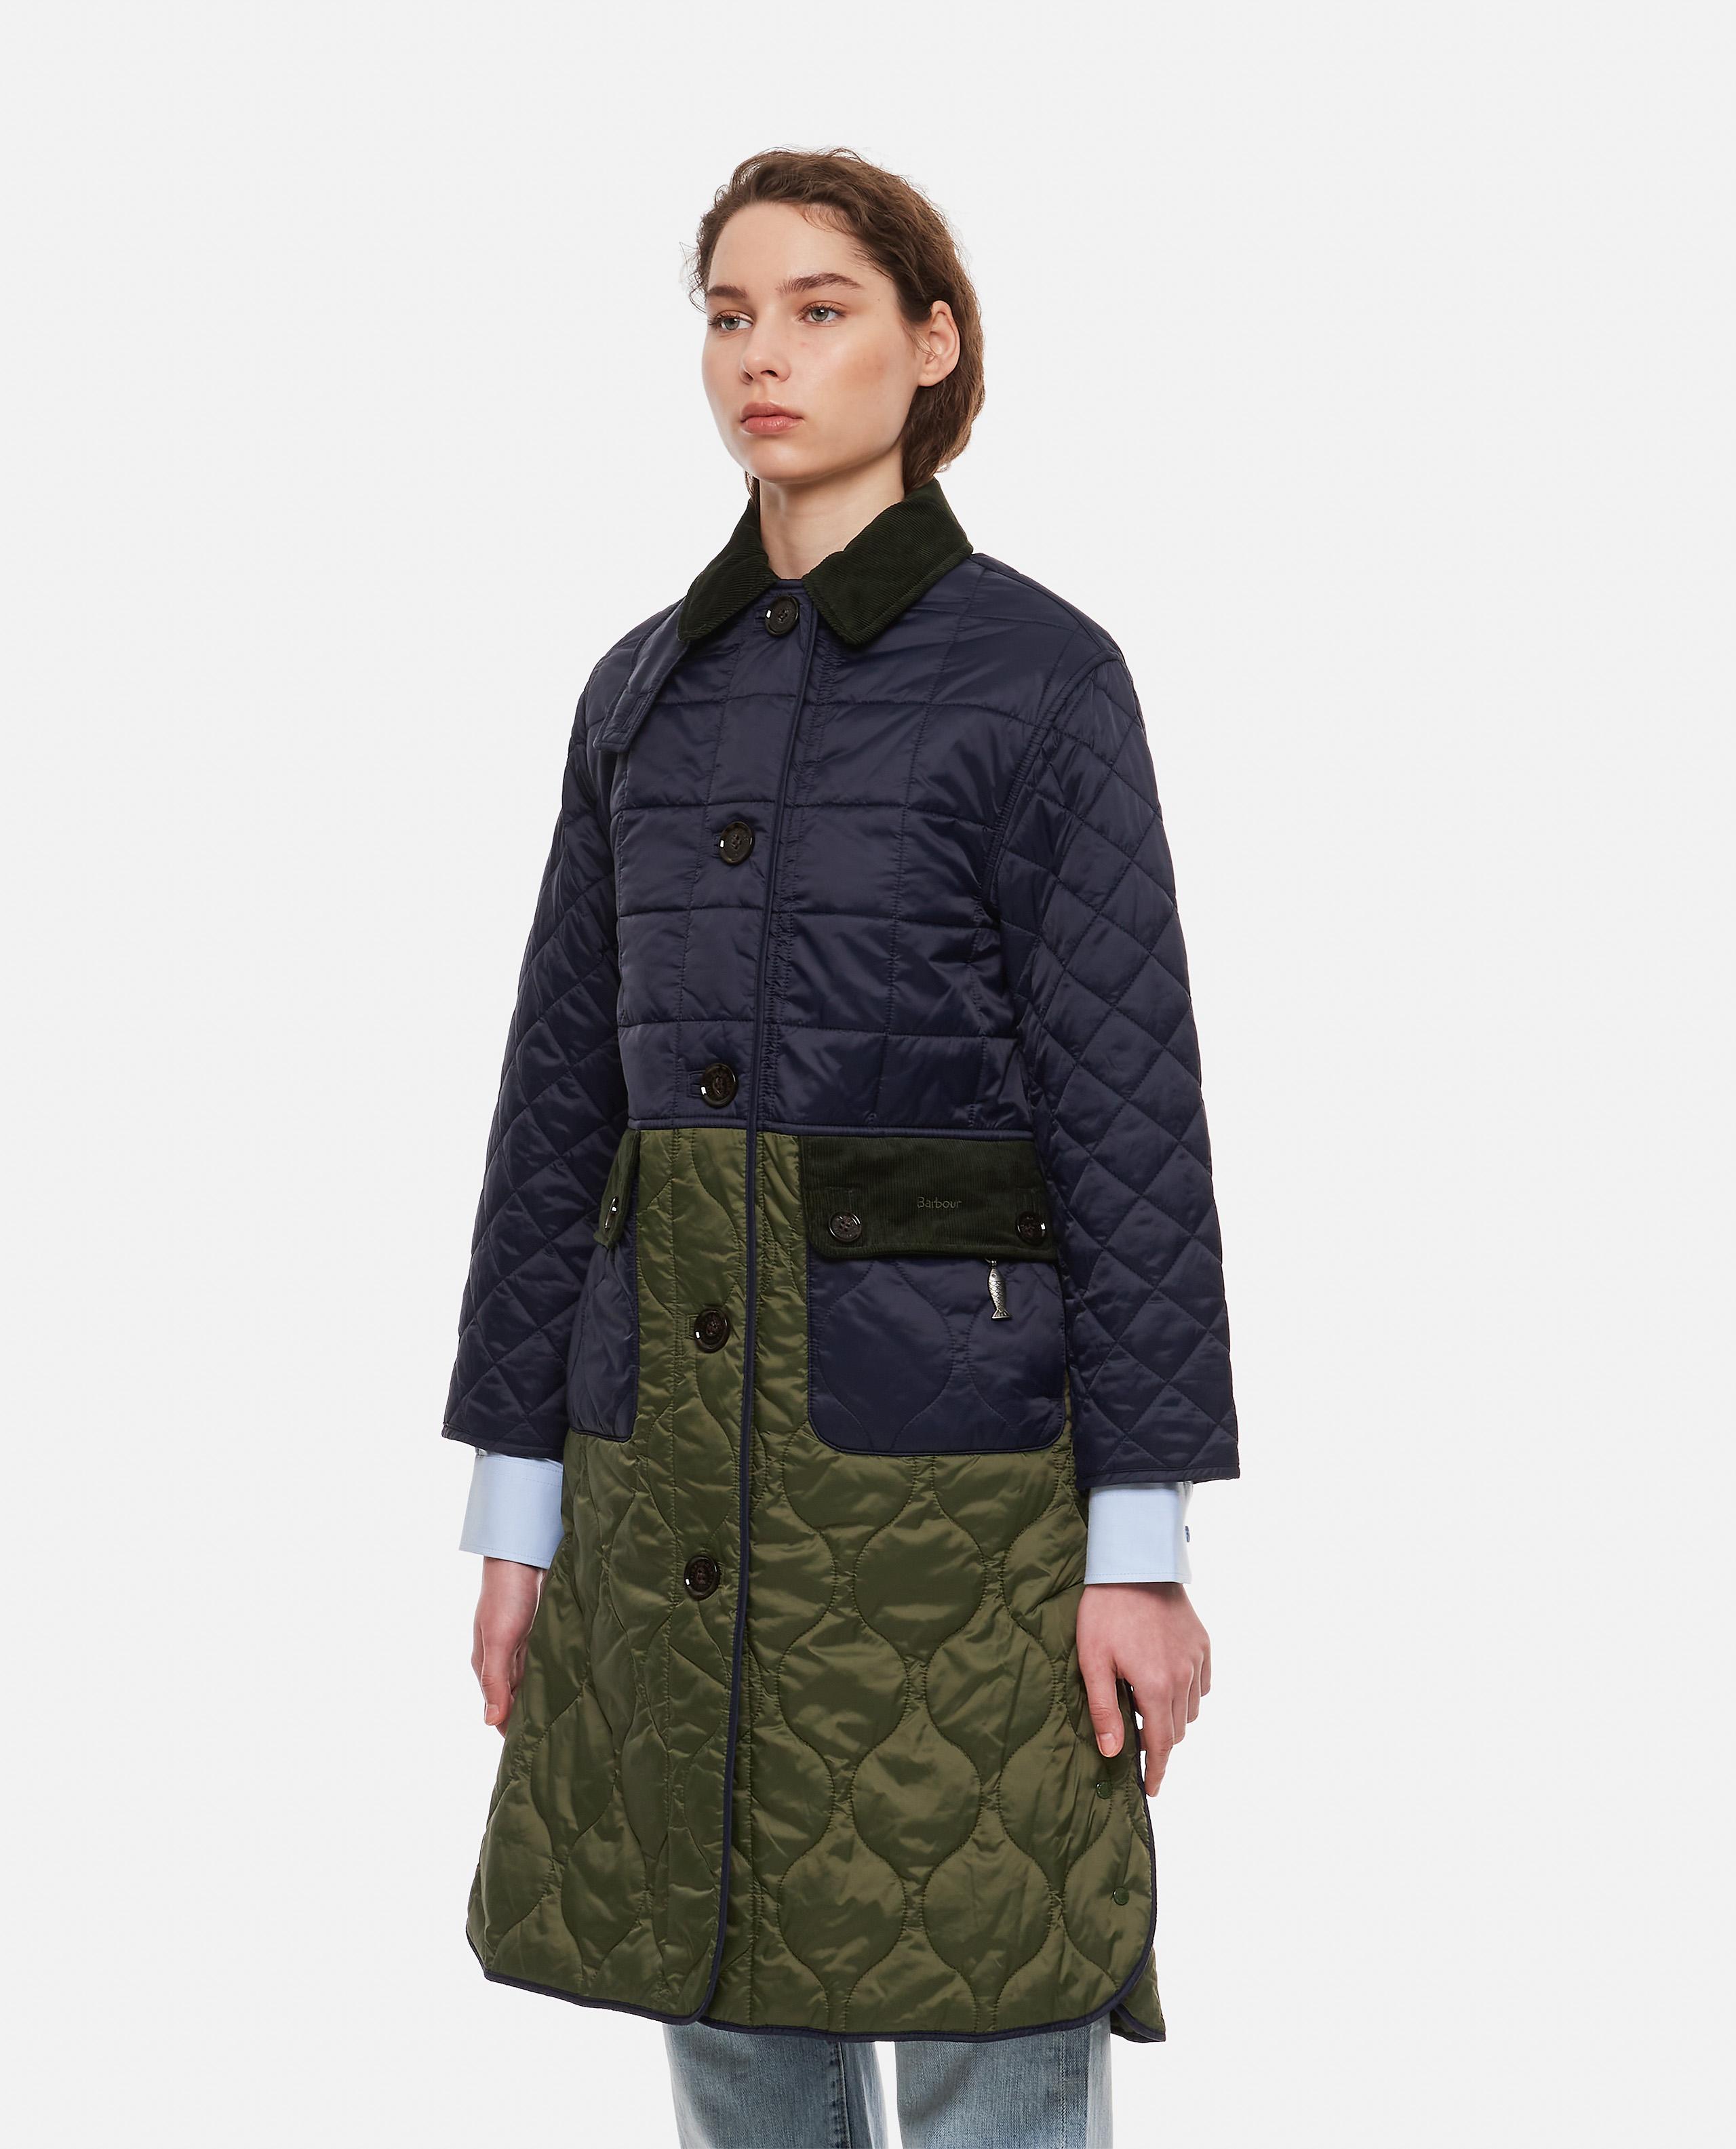 Barbour By Alexa Chung Hilda Quilted Coat in Blue | Lyst